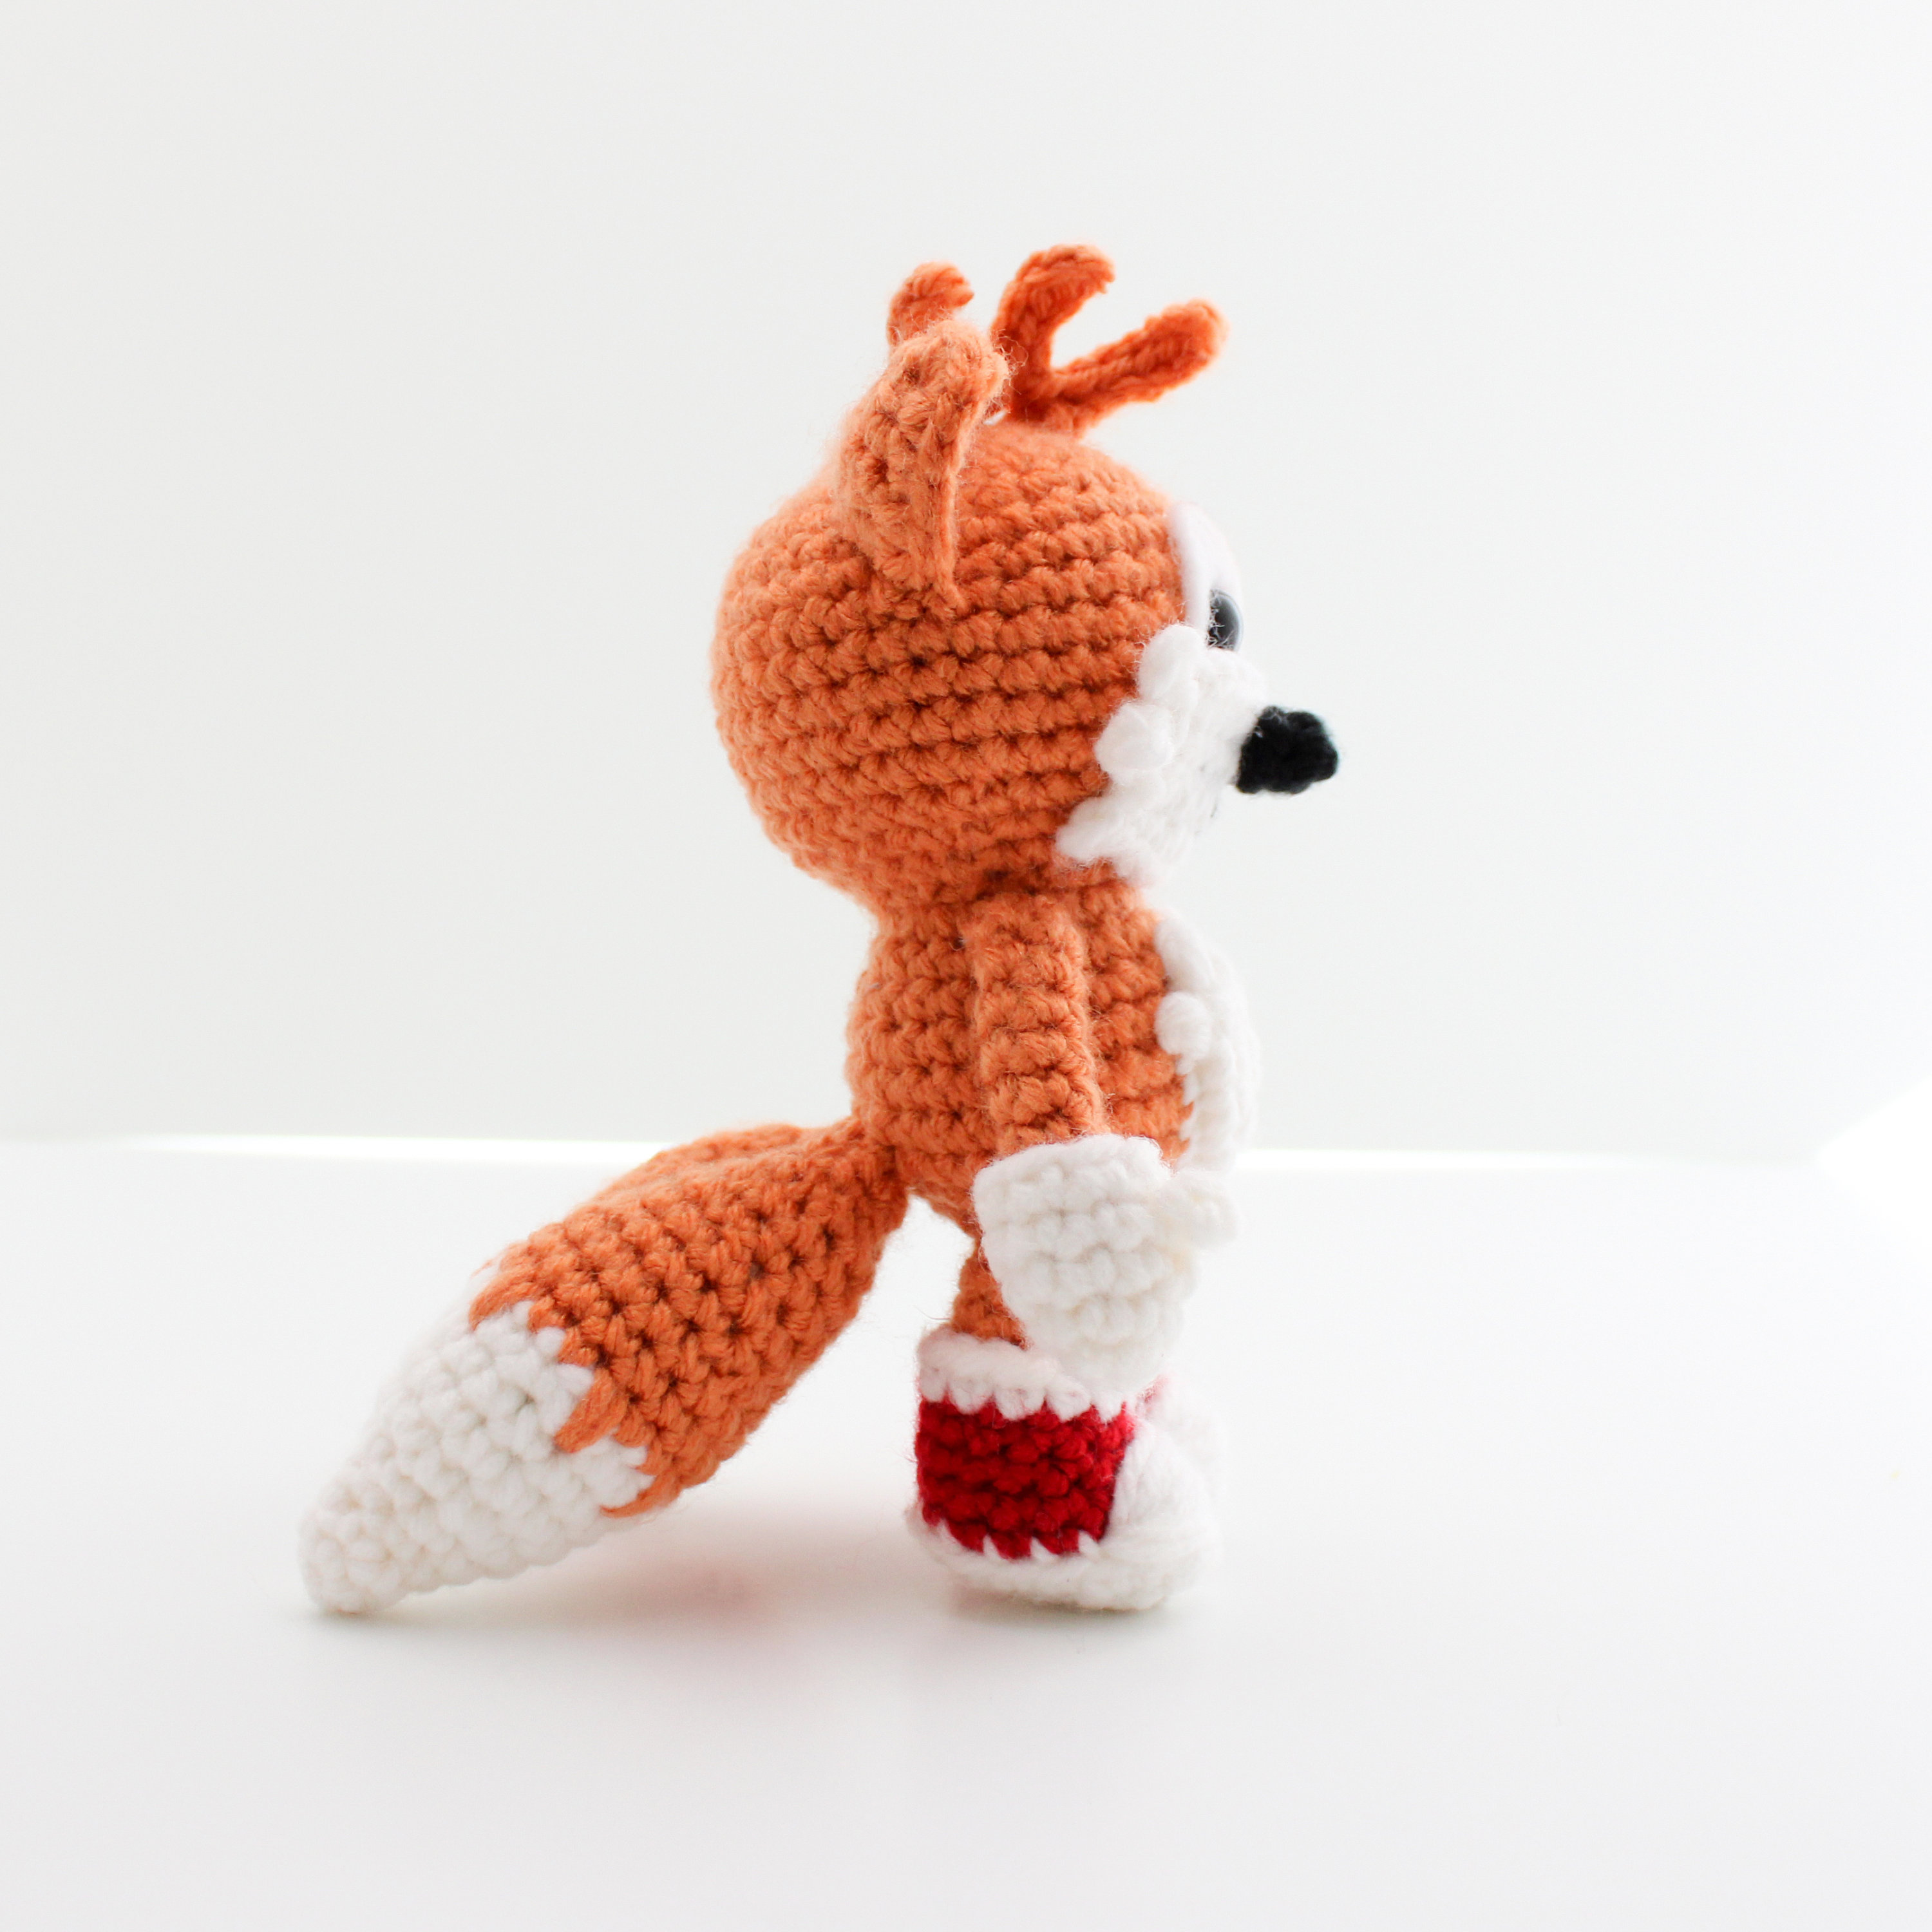 How to secure and hide Amigurumi Crochet Yarn Tails - mycrochetchums